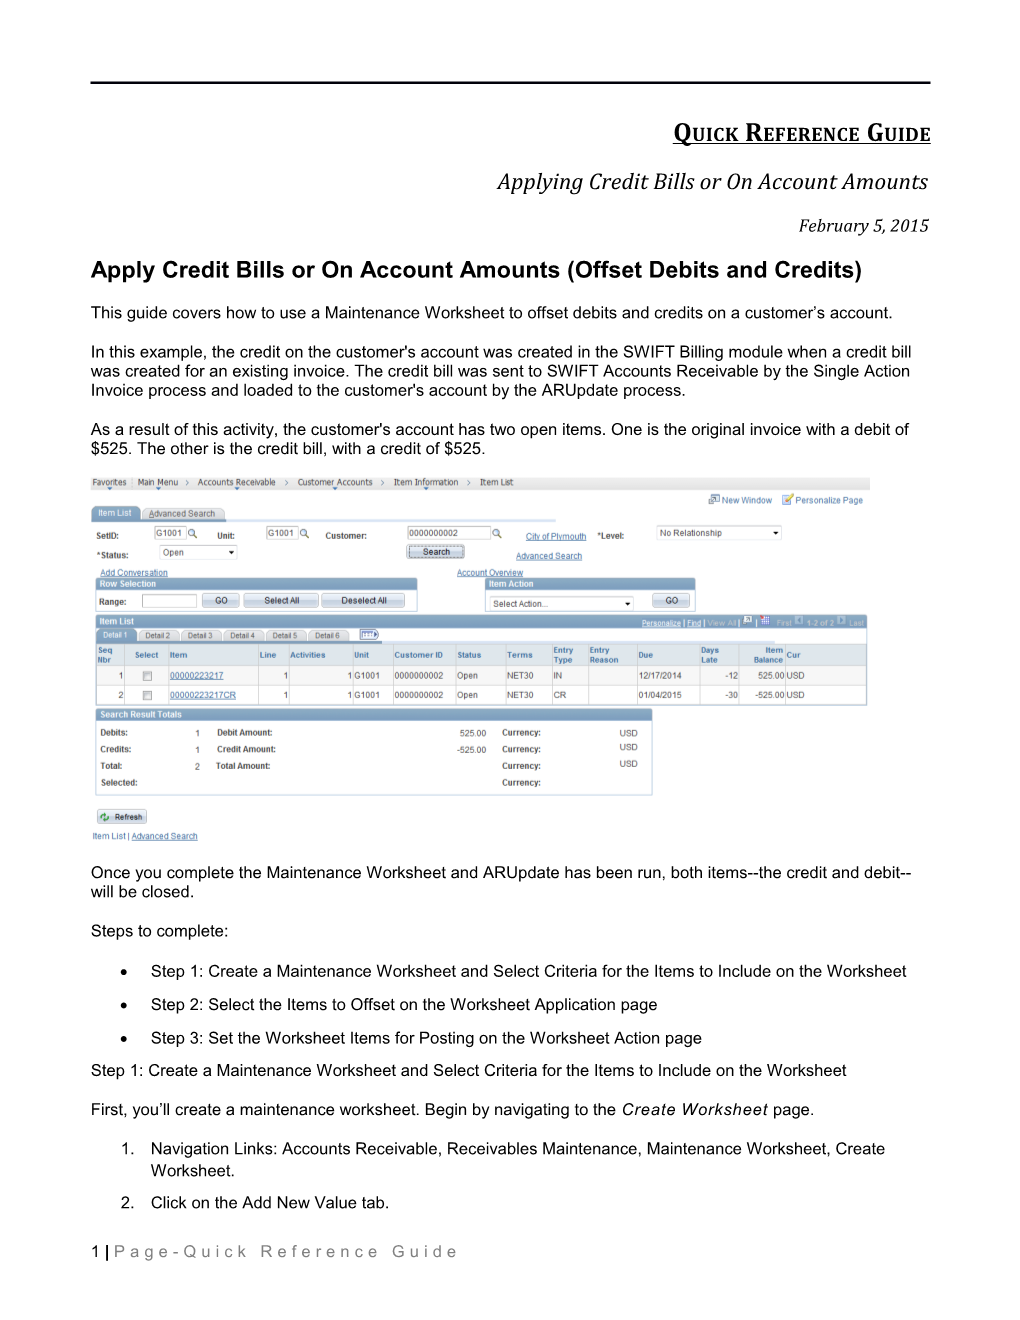 Applying Credit Bills Or on Account Amounts Quick Reference Guides